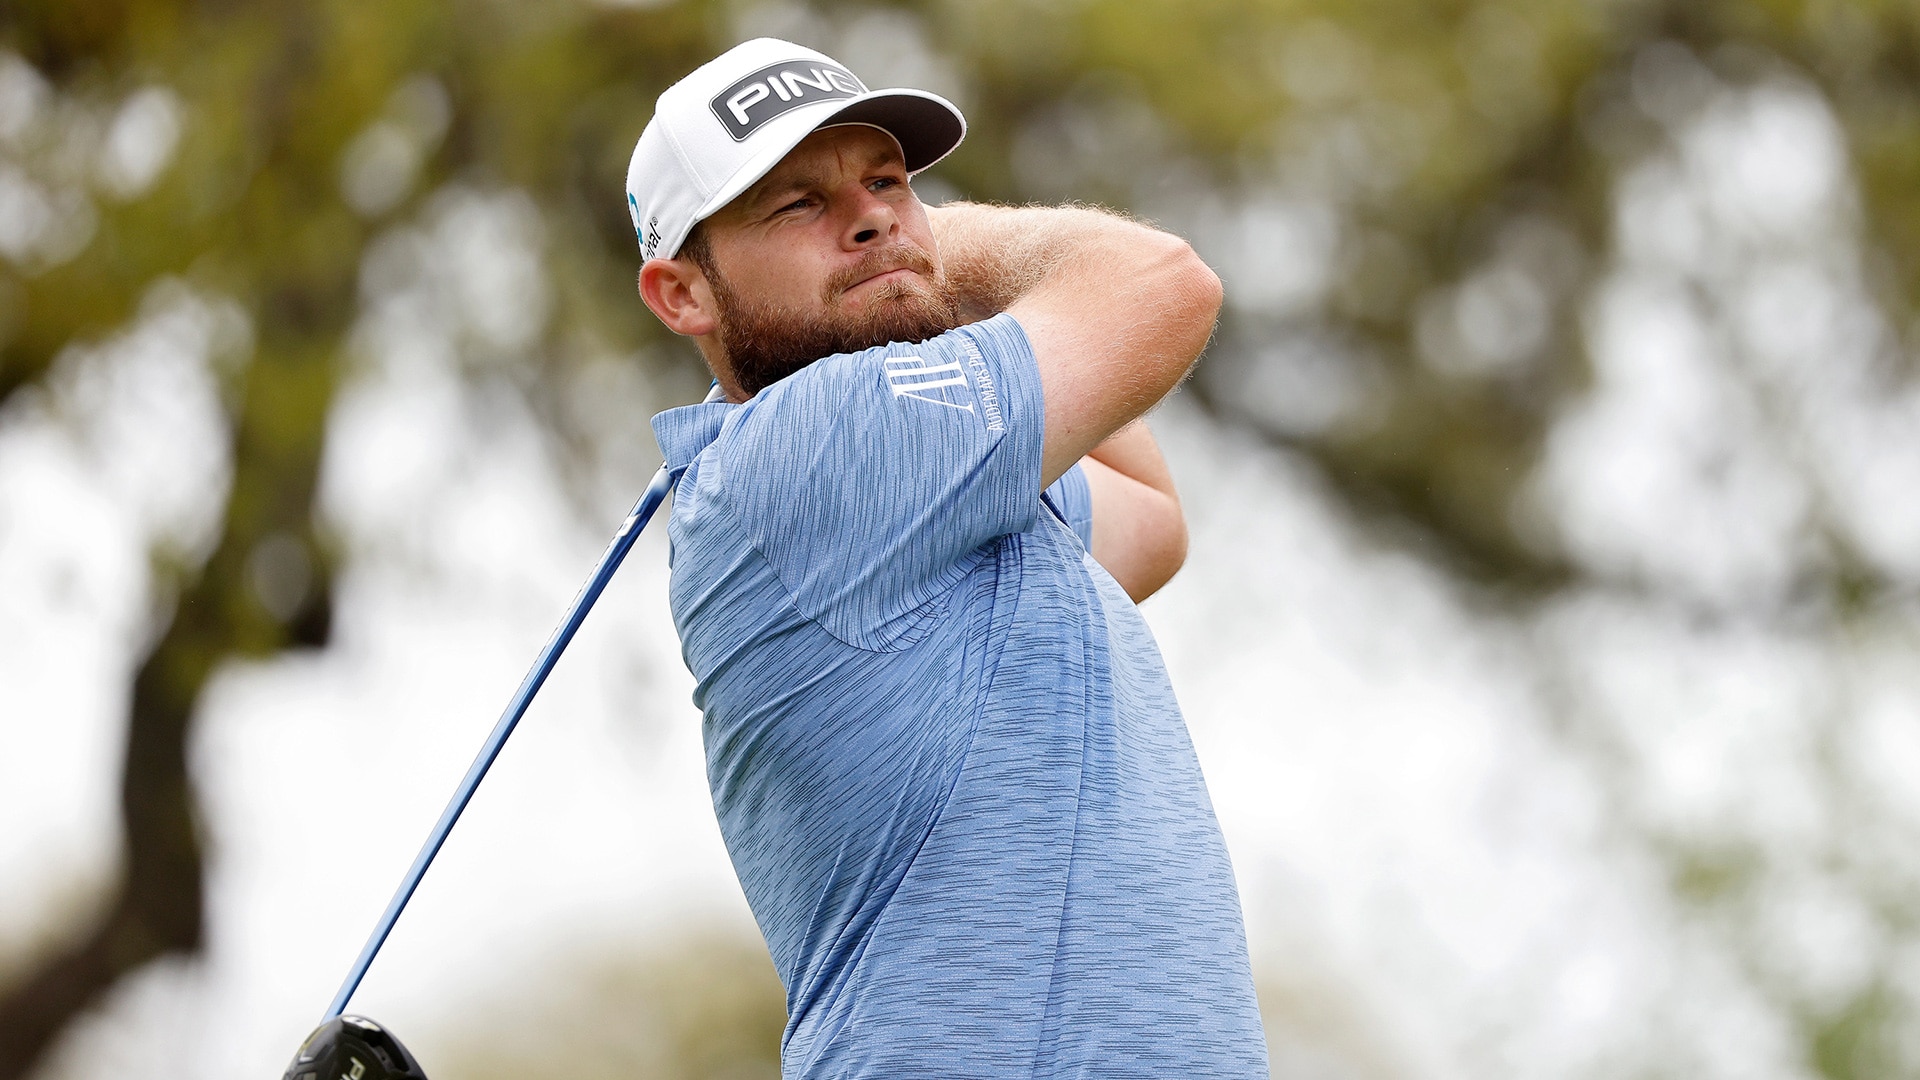 Tyrrell Hatton hoping hand pain is just a ‘weird thing’ after Match Play loss to Ben Griffin